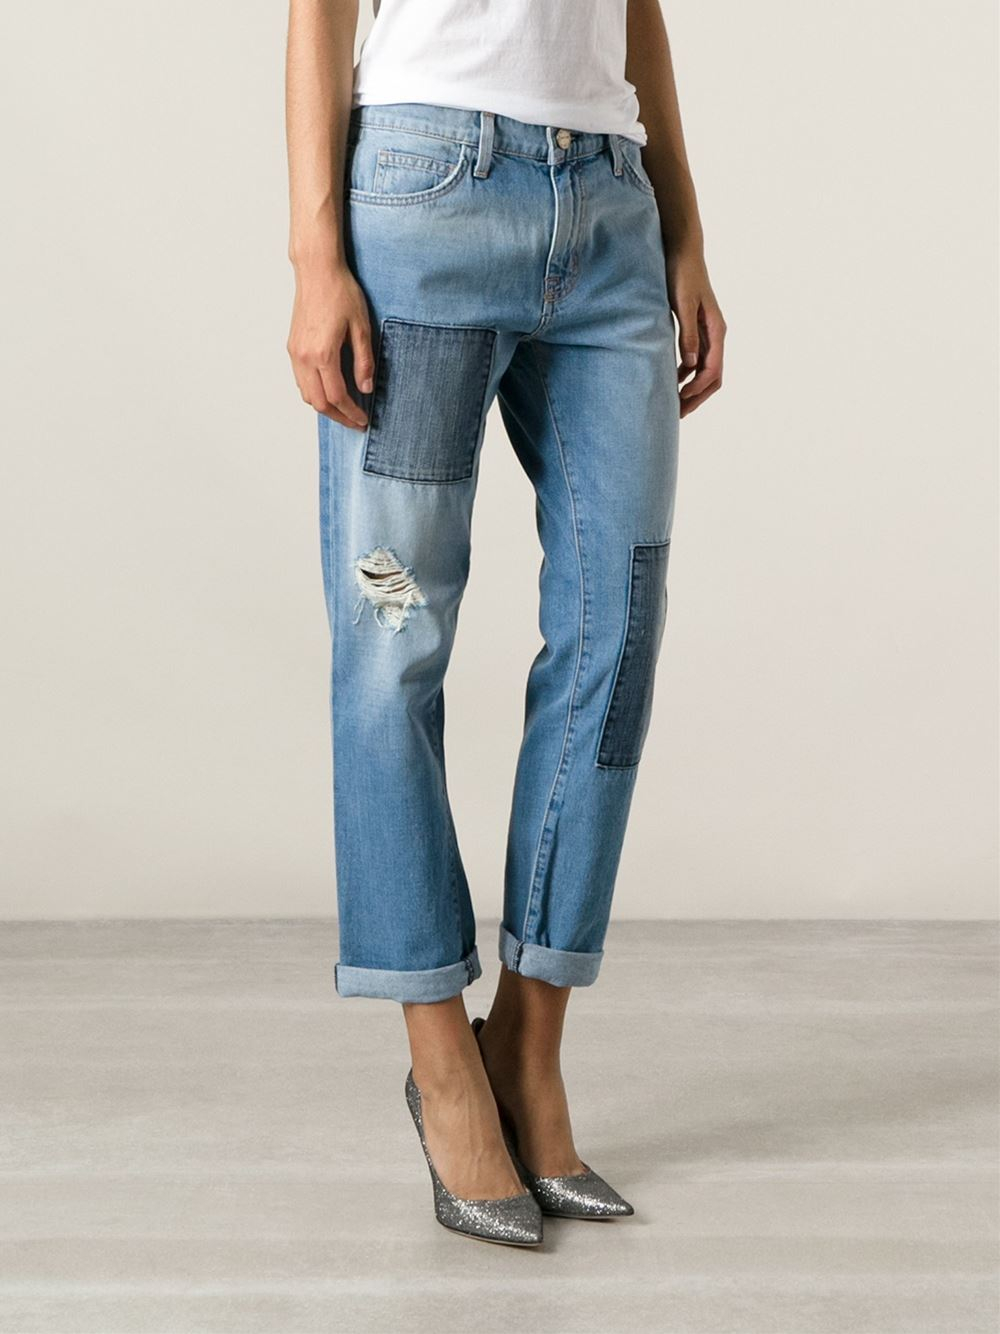 Current/Elliott 'The Fling' Jeans in Blue - Lyst